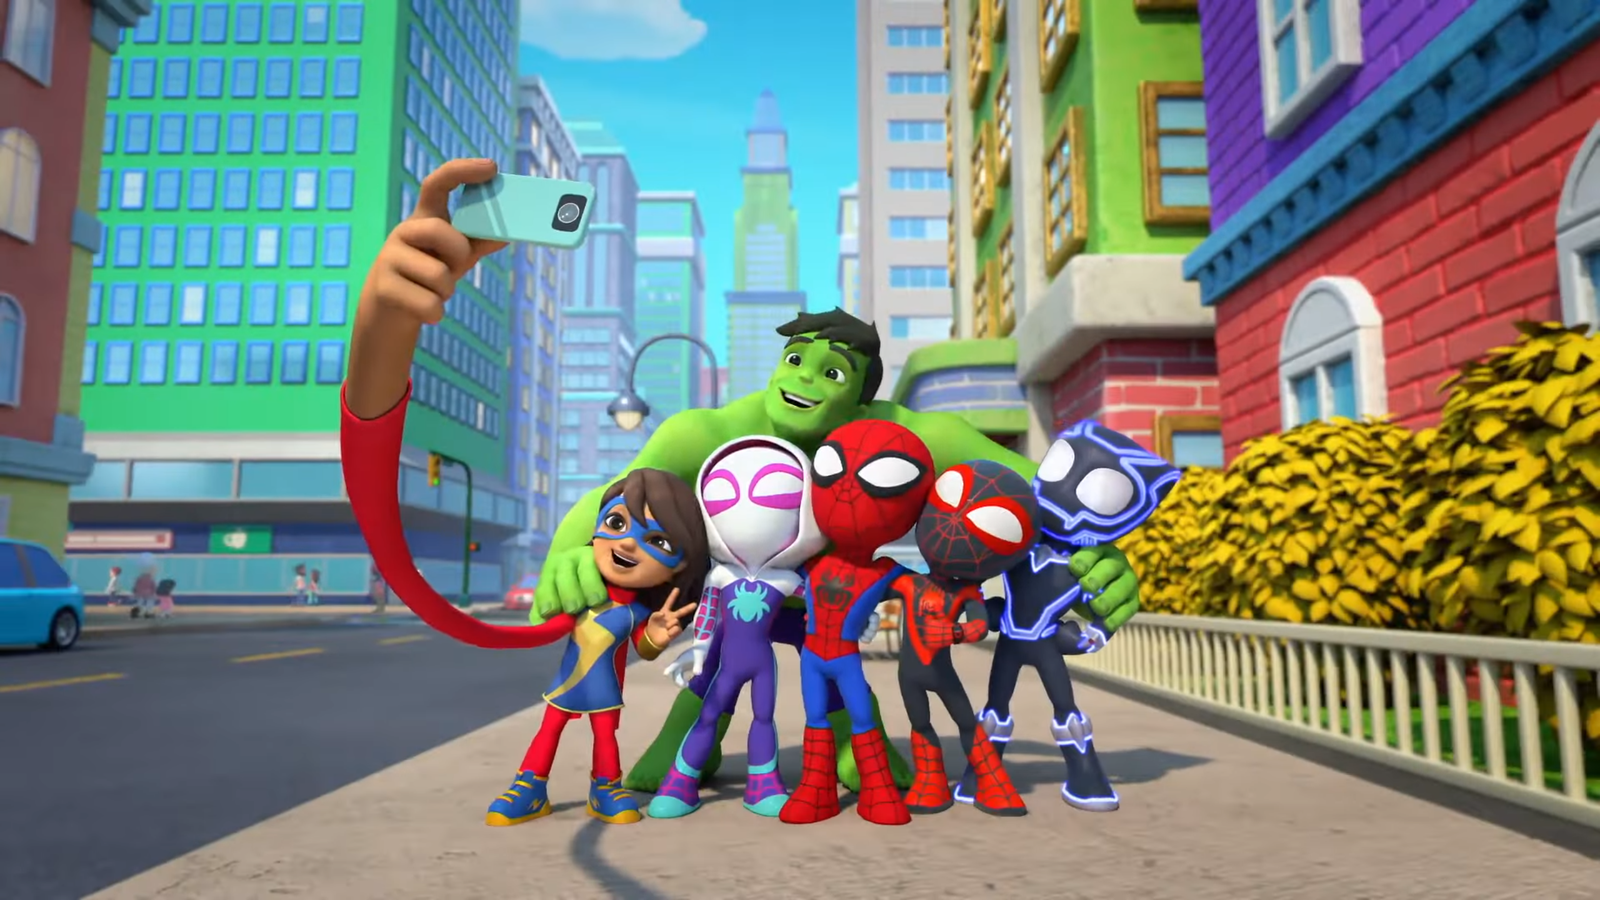 Listen To The Fun Theme Song For Spidey and His Amazing Friends